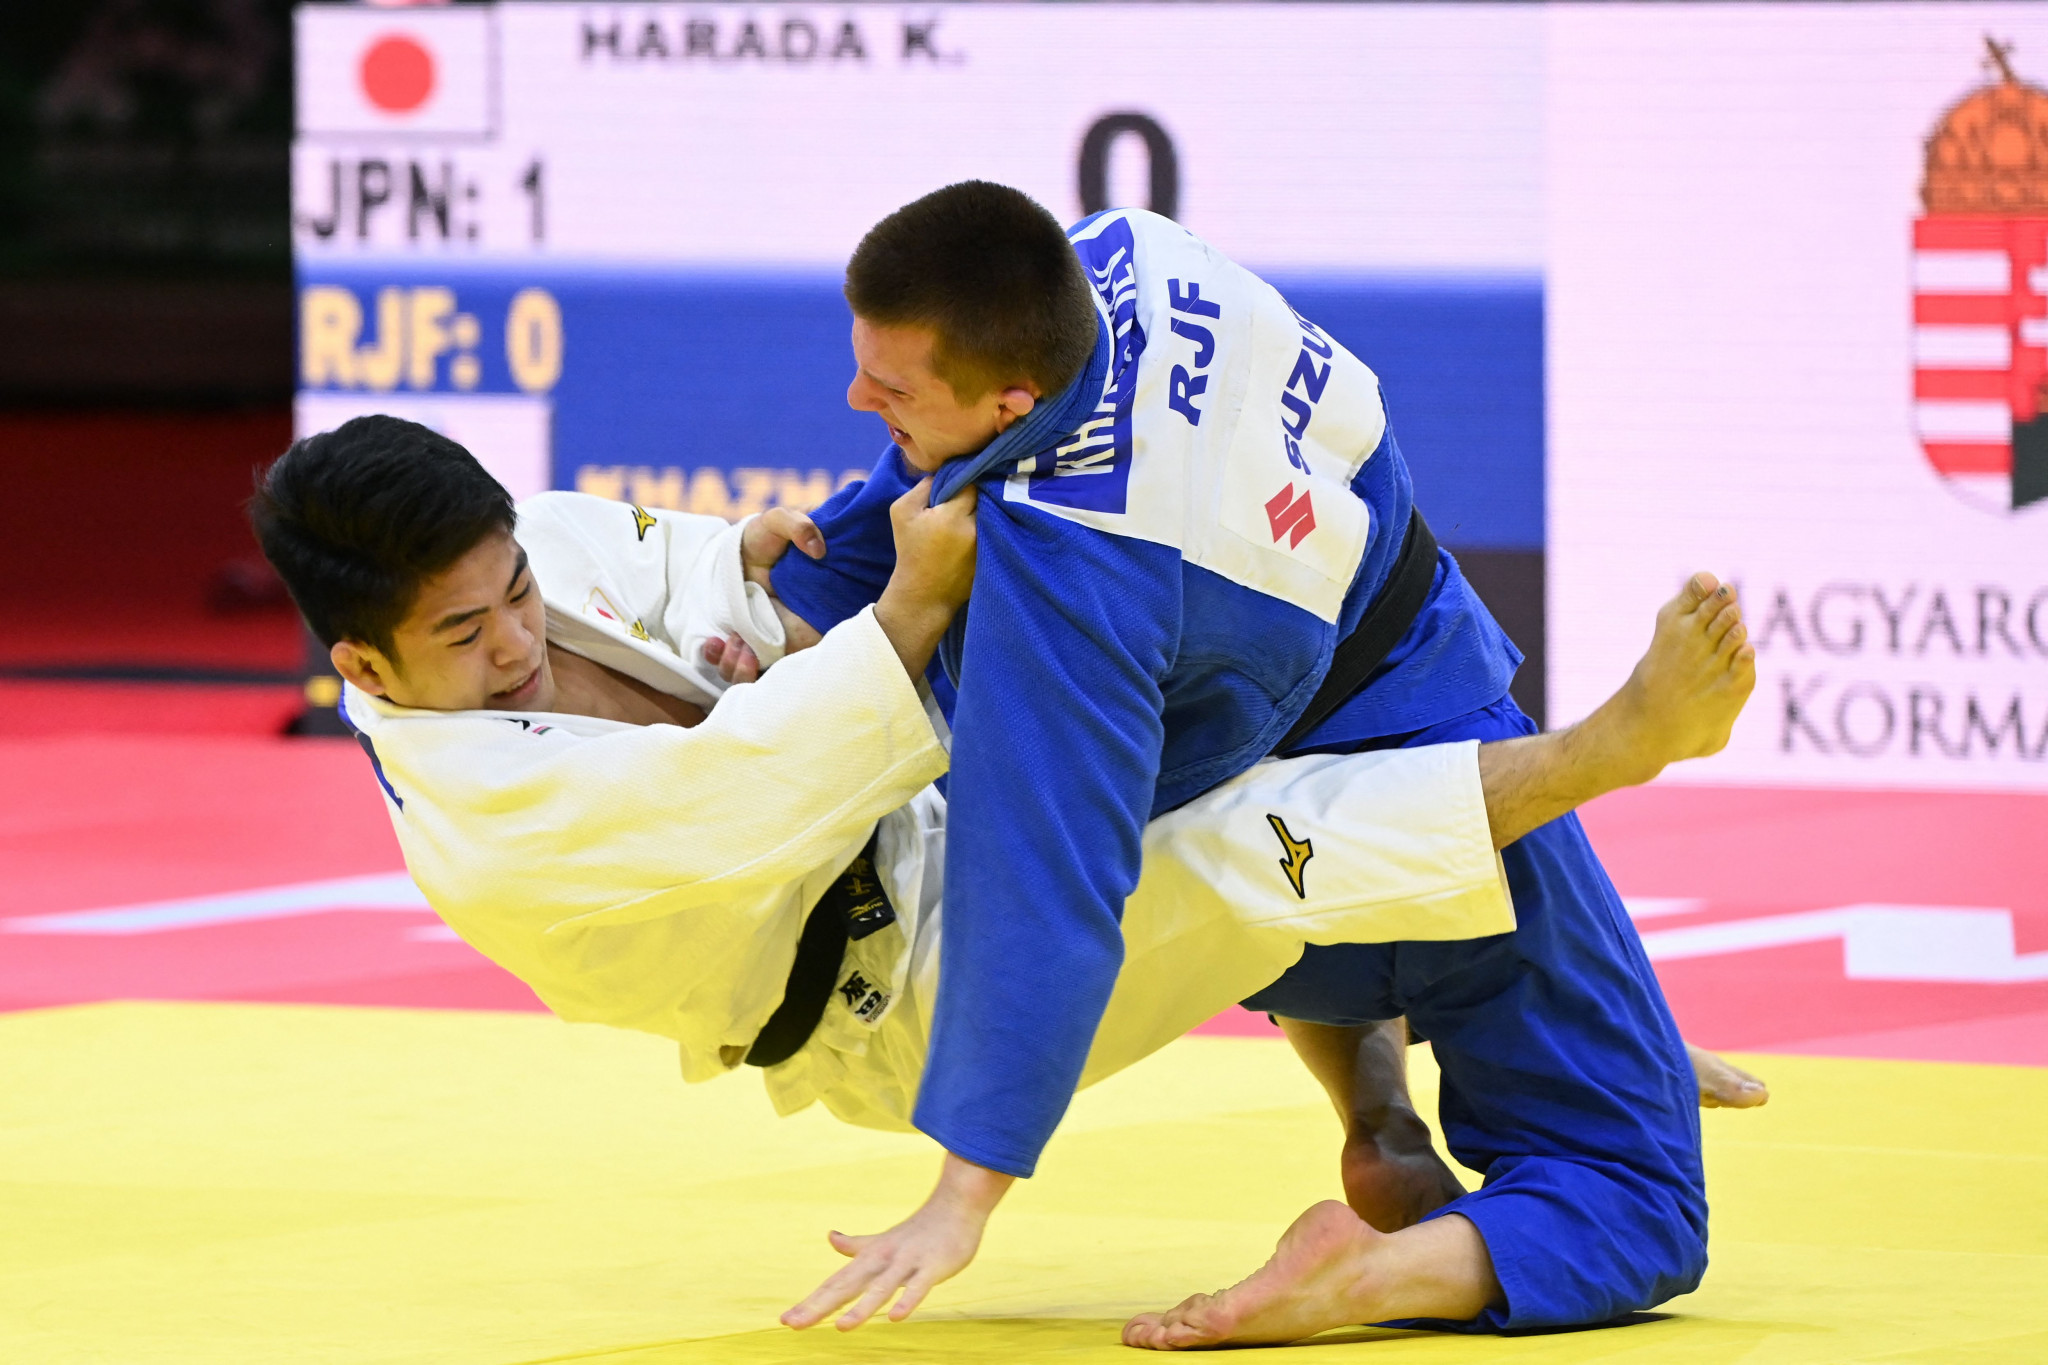 Japan claimed gold in the mixed team event today at the World Judo Championships ©Getty Images